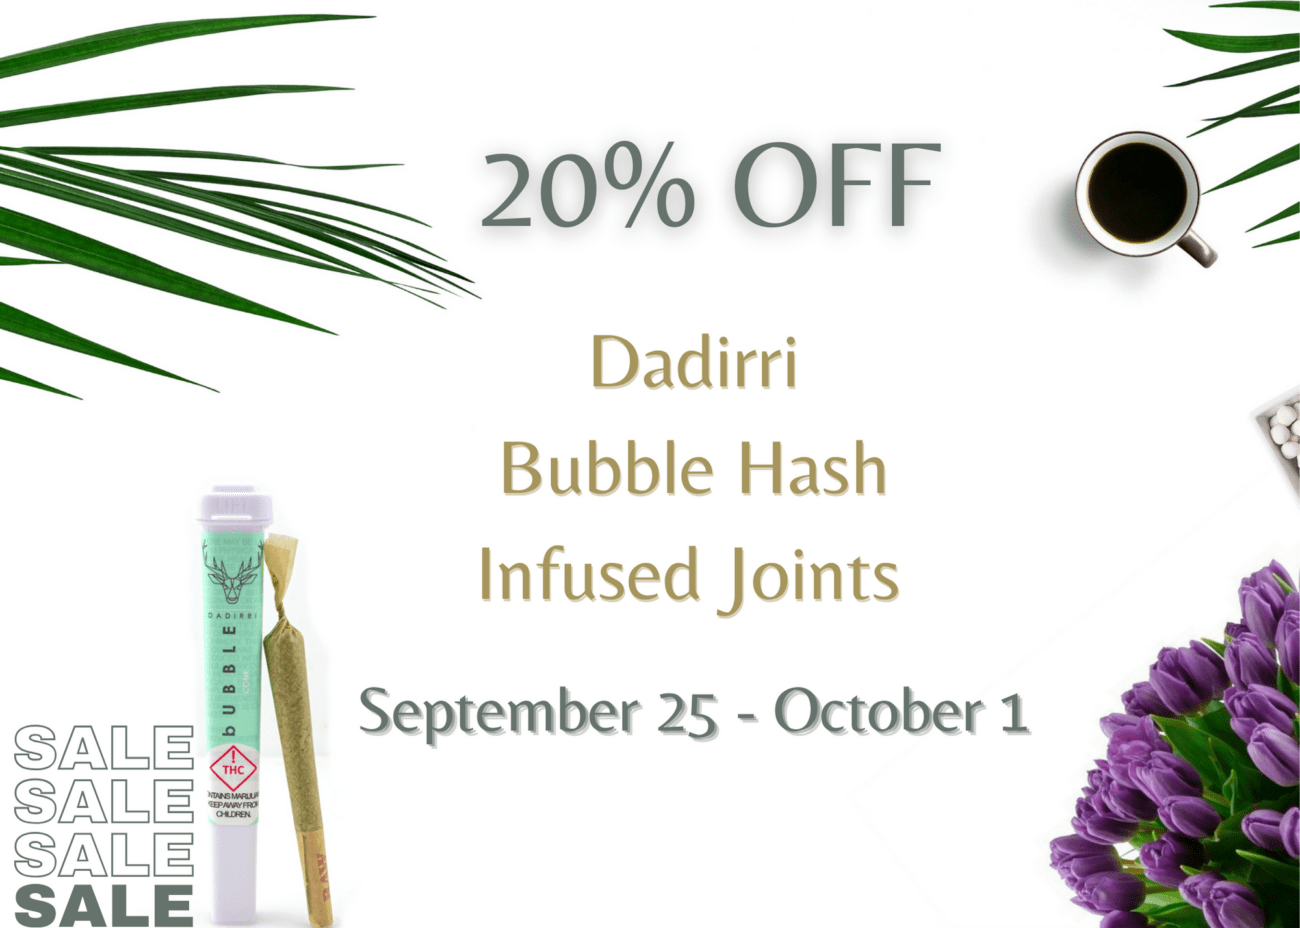 Dadirri bubble hash infused joints are on sale all week! Perfect time to treat yourself!